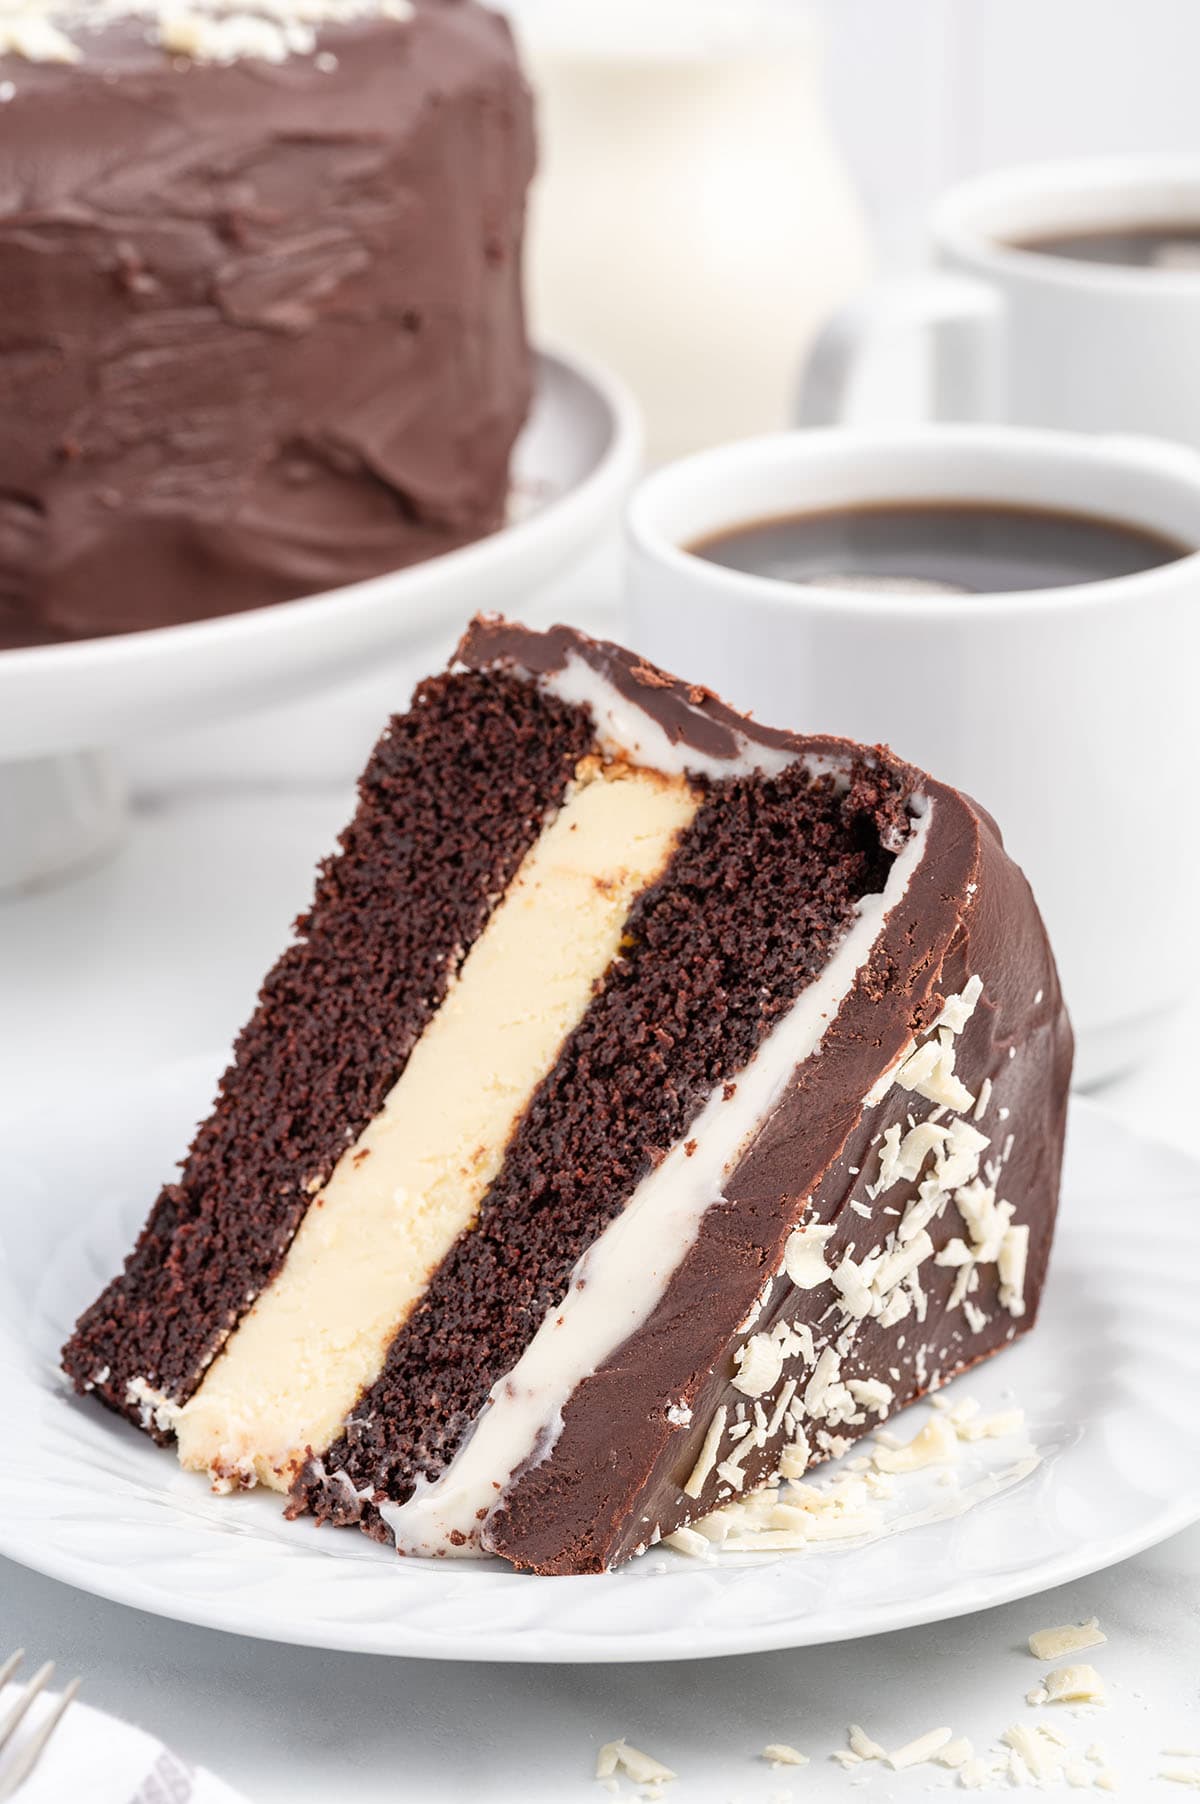 Chocolate Layer Cheesecake with Cream Cheese Filling sliced on plate with a coffee at the back.